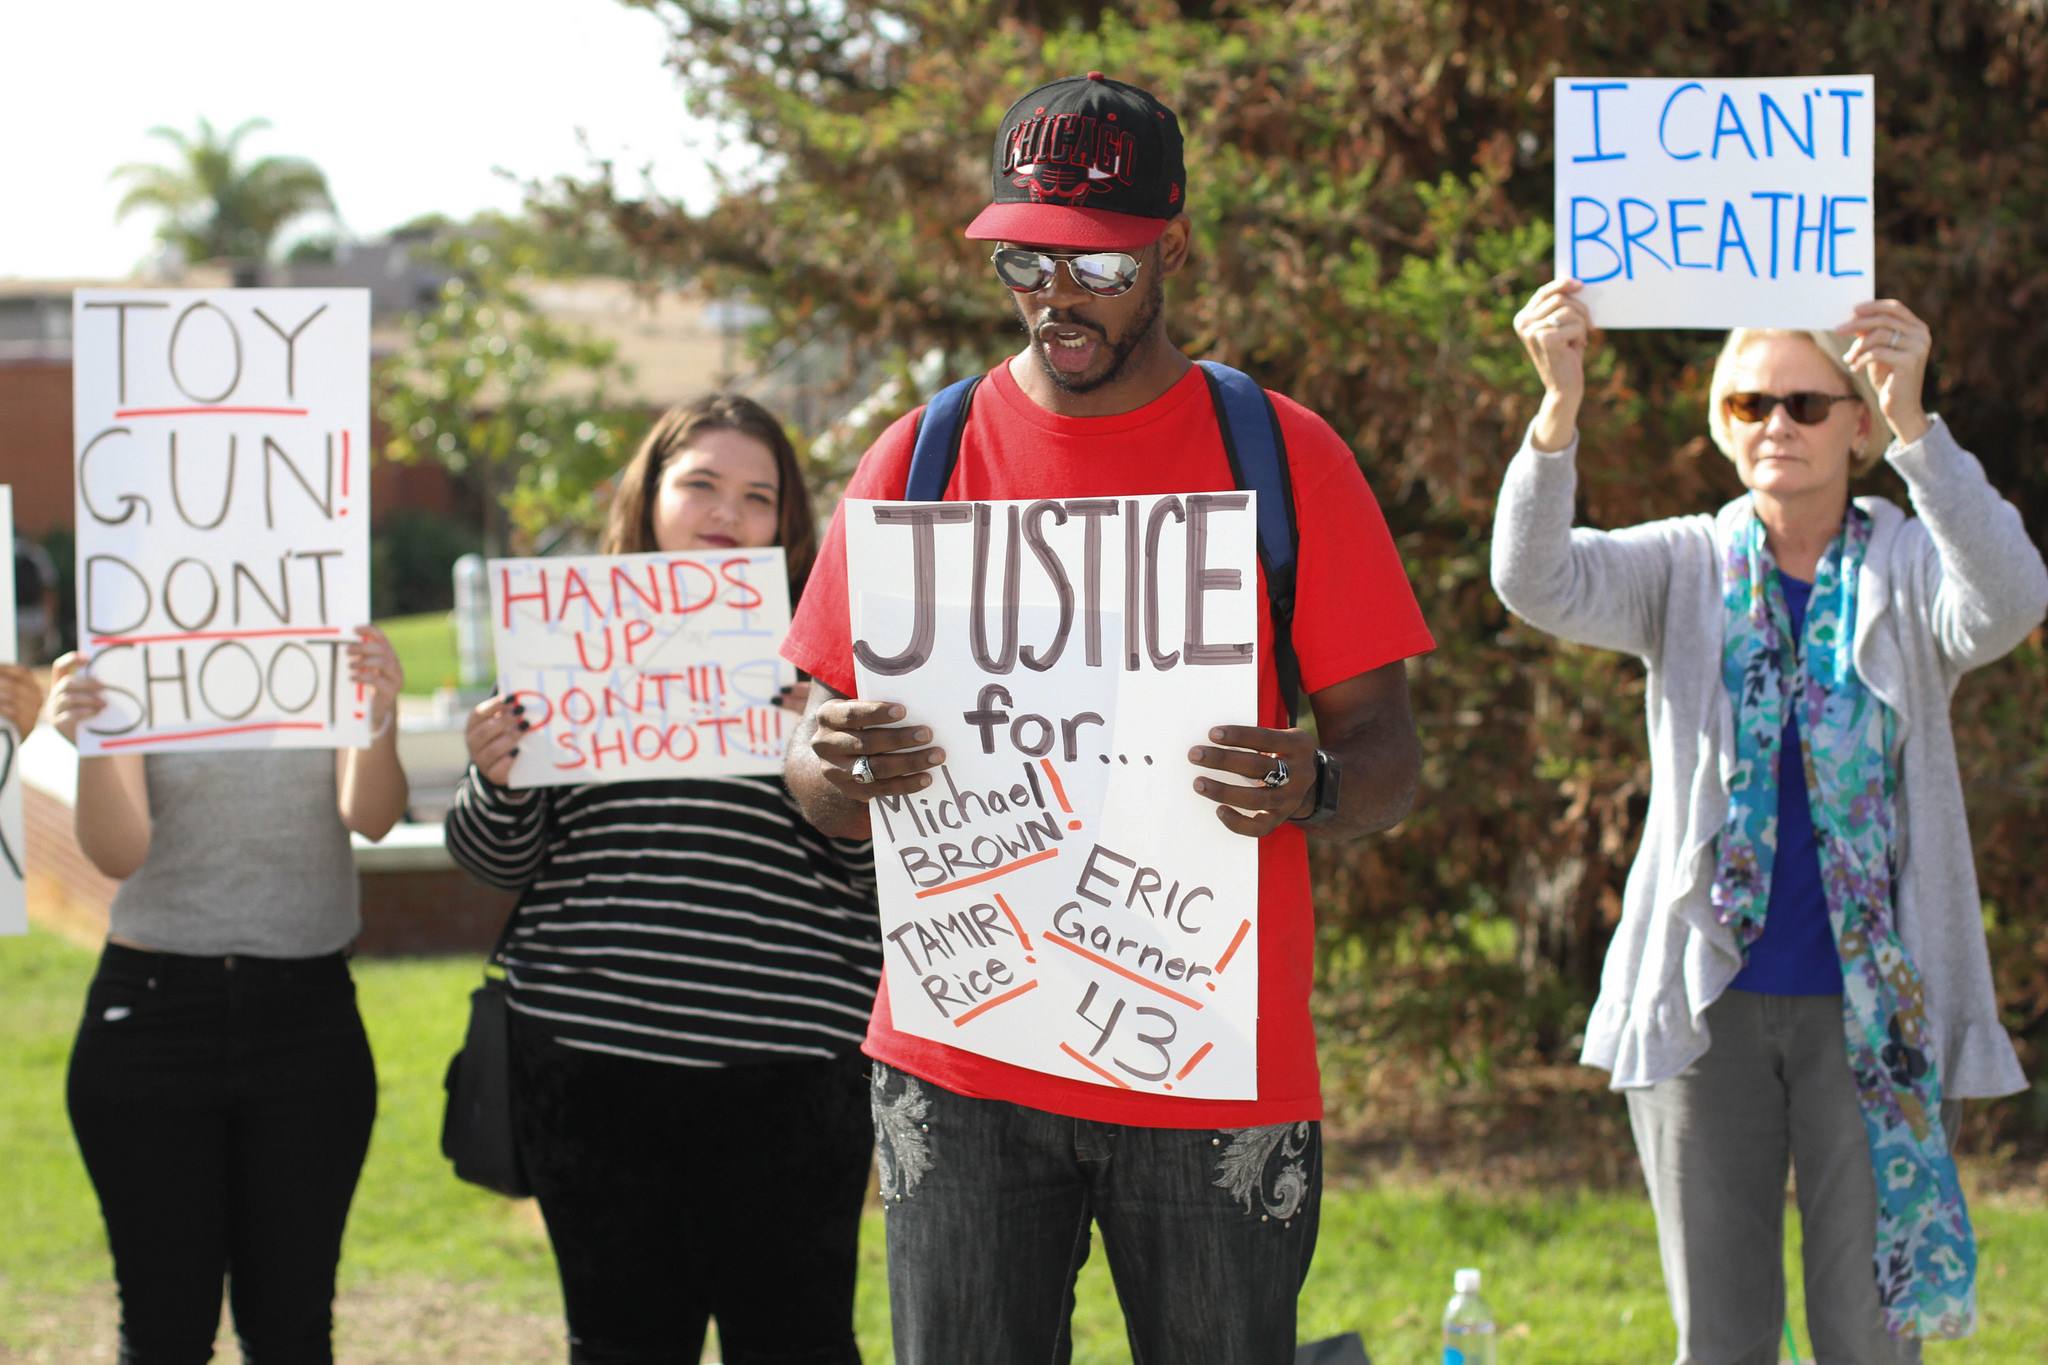 (l-r) Palomar Students Cheyenne Bartram, Christopher Walker and Barb Kelber hold signs and chant slogans at a demonstration on the Palomar College Campus on Dec. 10, 2014. The students gathered to protest against police brutality. (Telescope Staff/The Telescope)